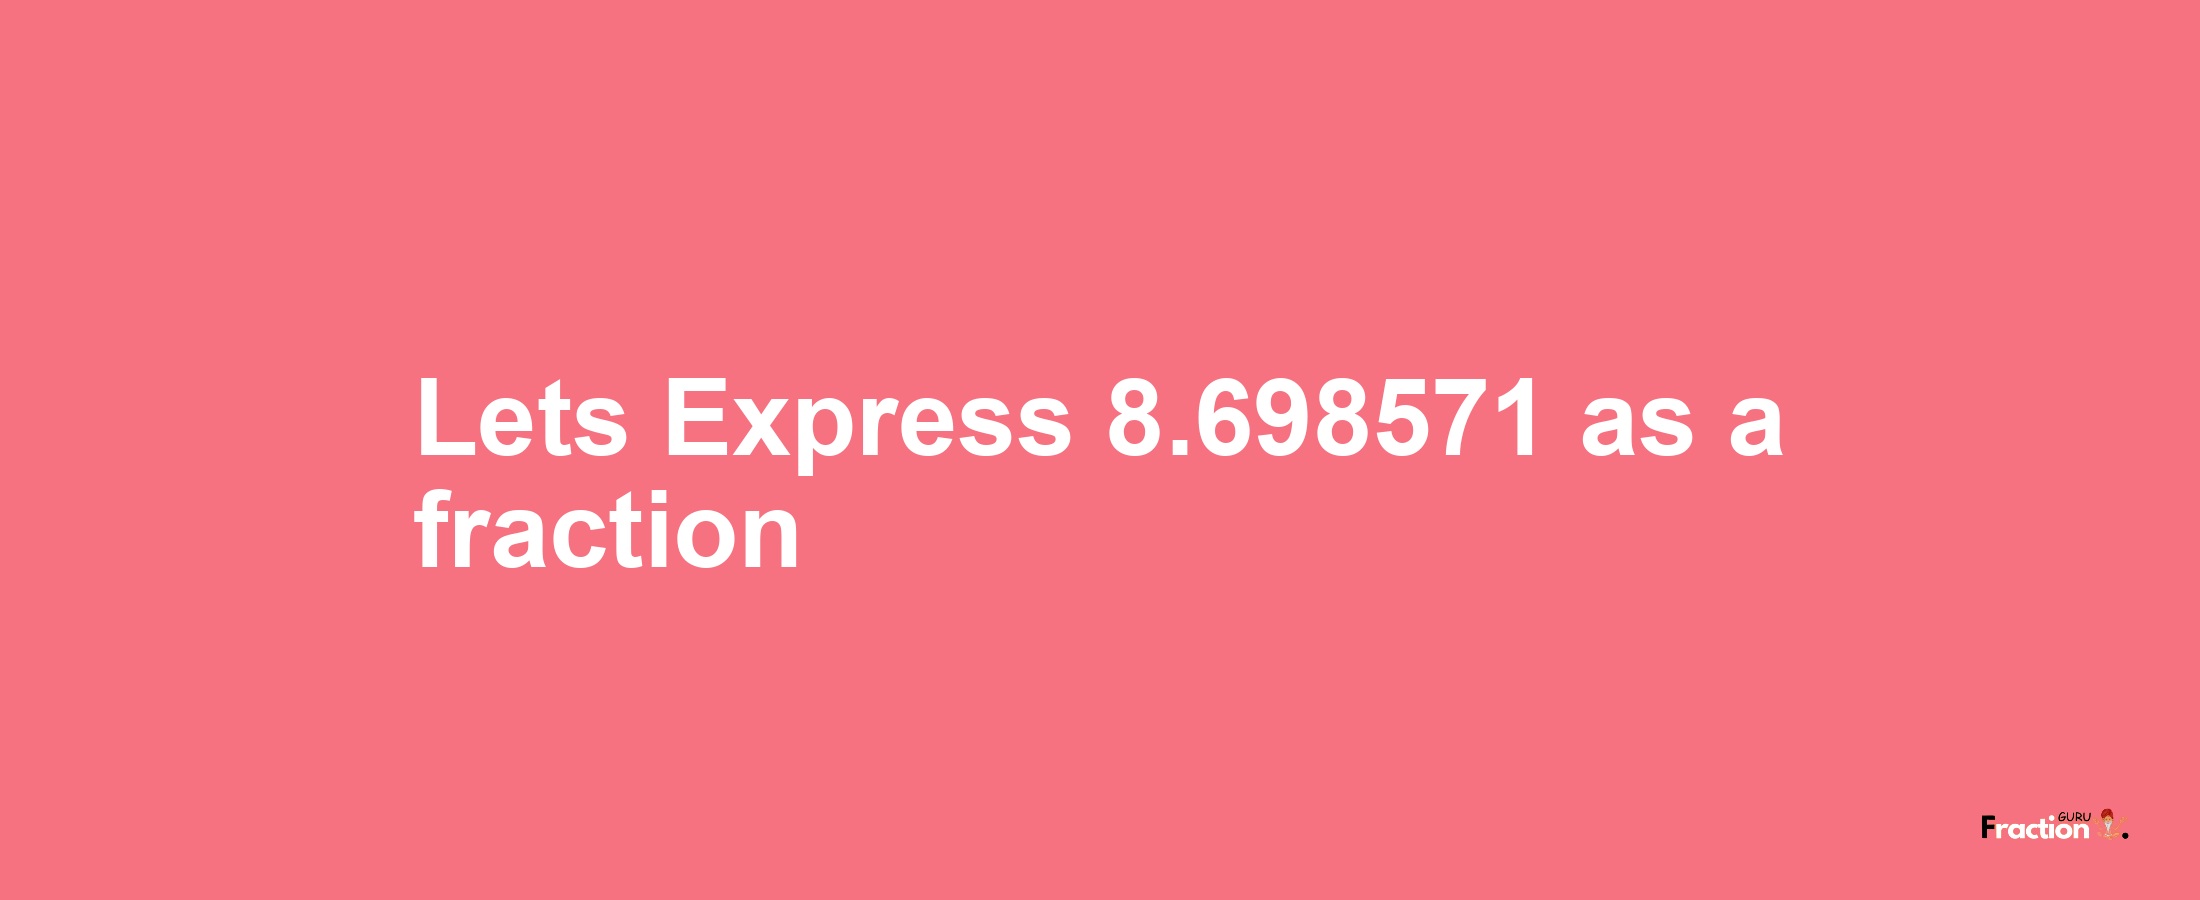 Lets Express 8.698571 as afraction